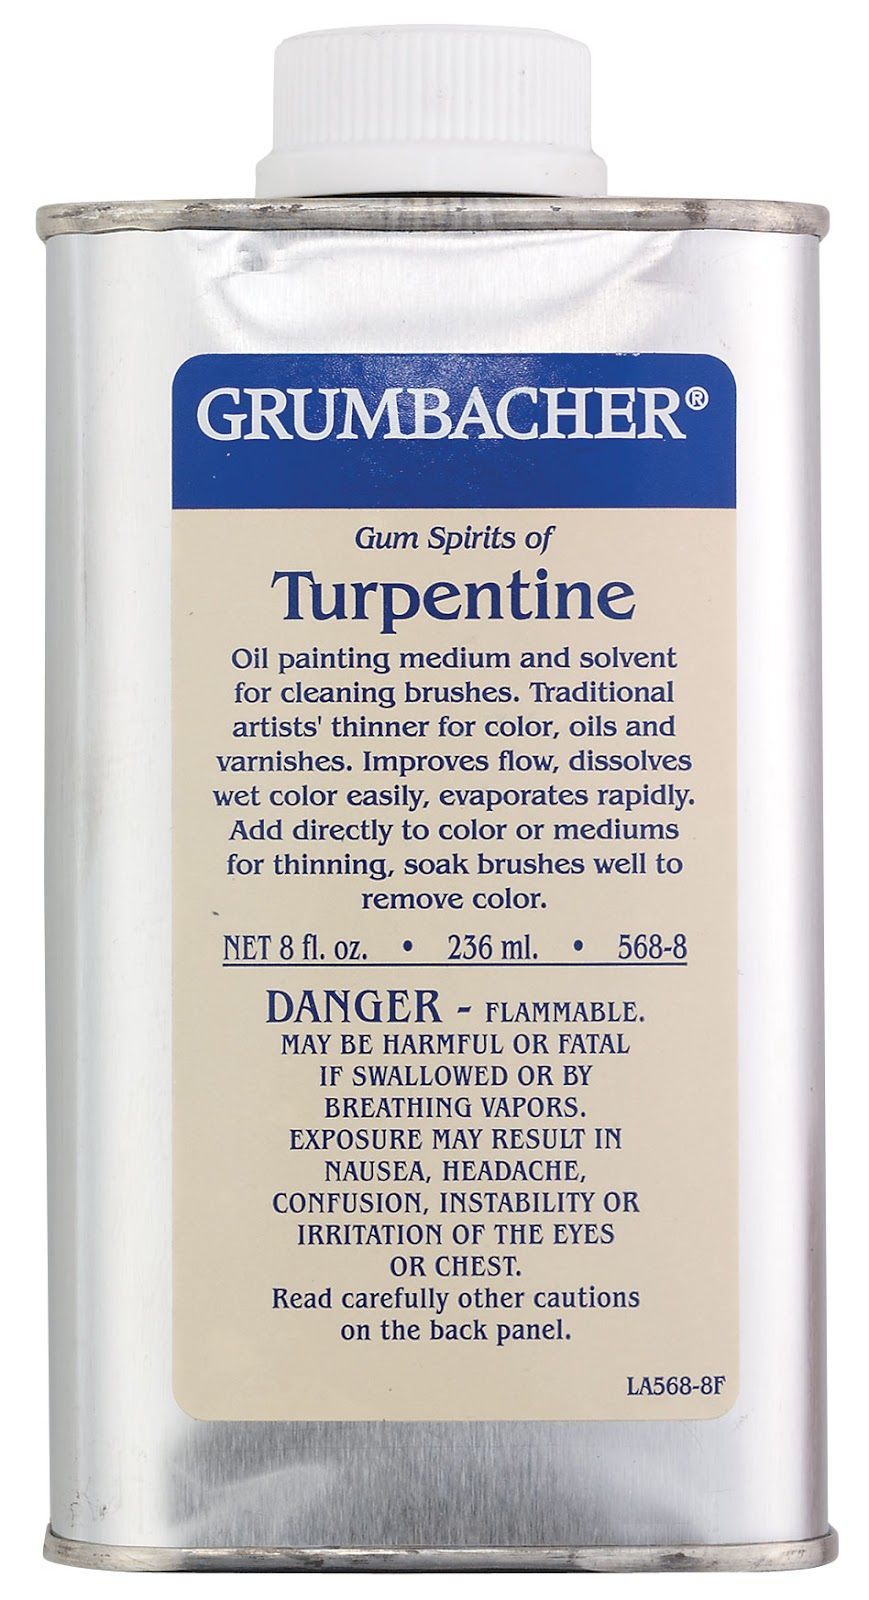 Is Gum Turpentine the Same as Turpentine Oil?